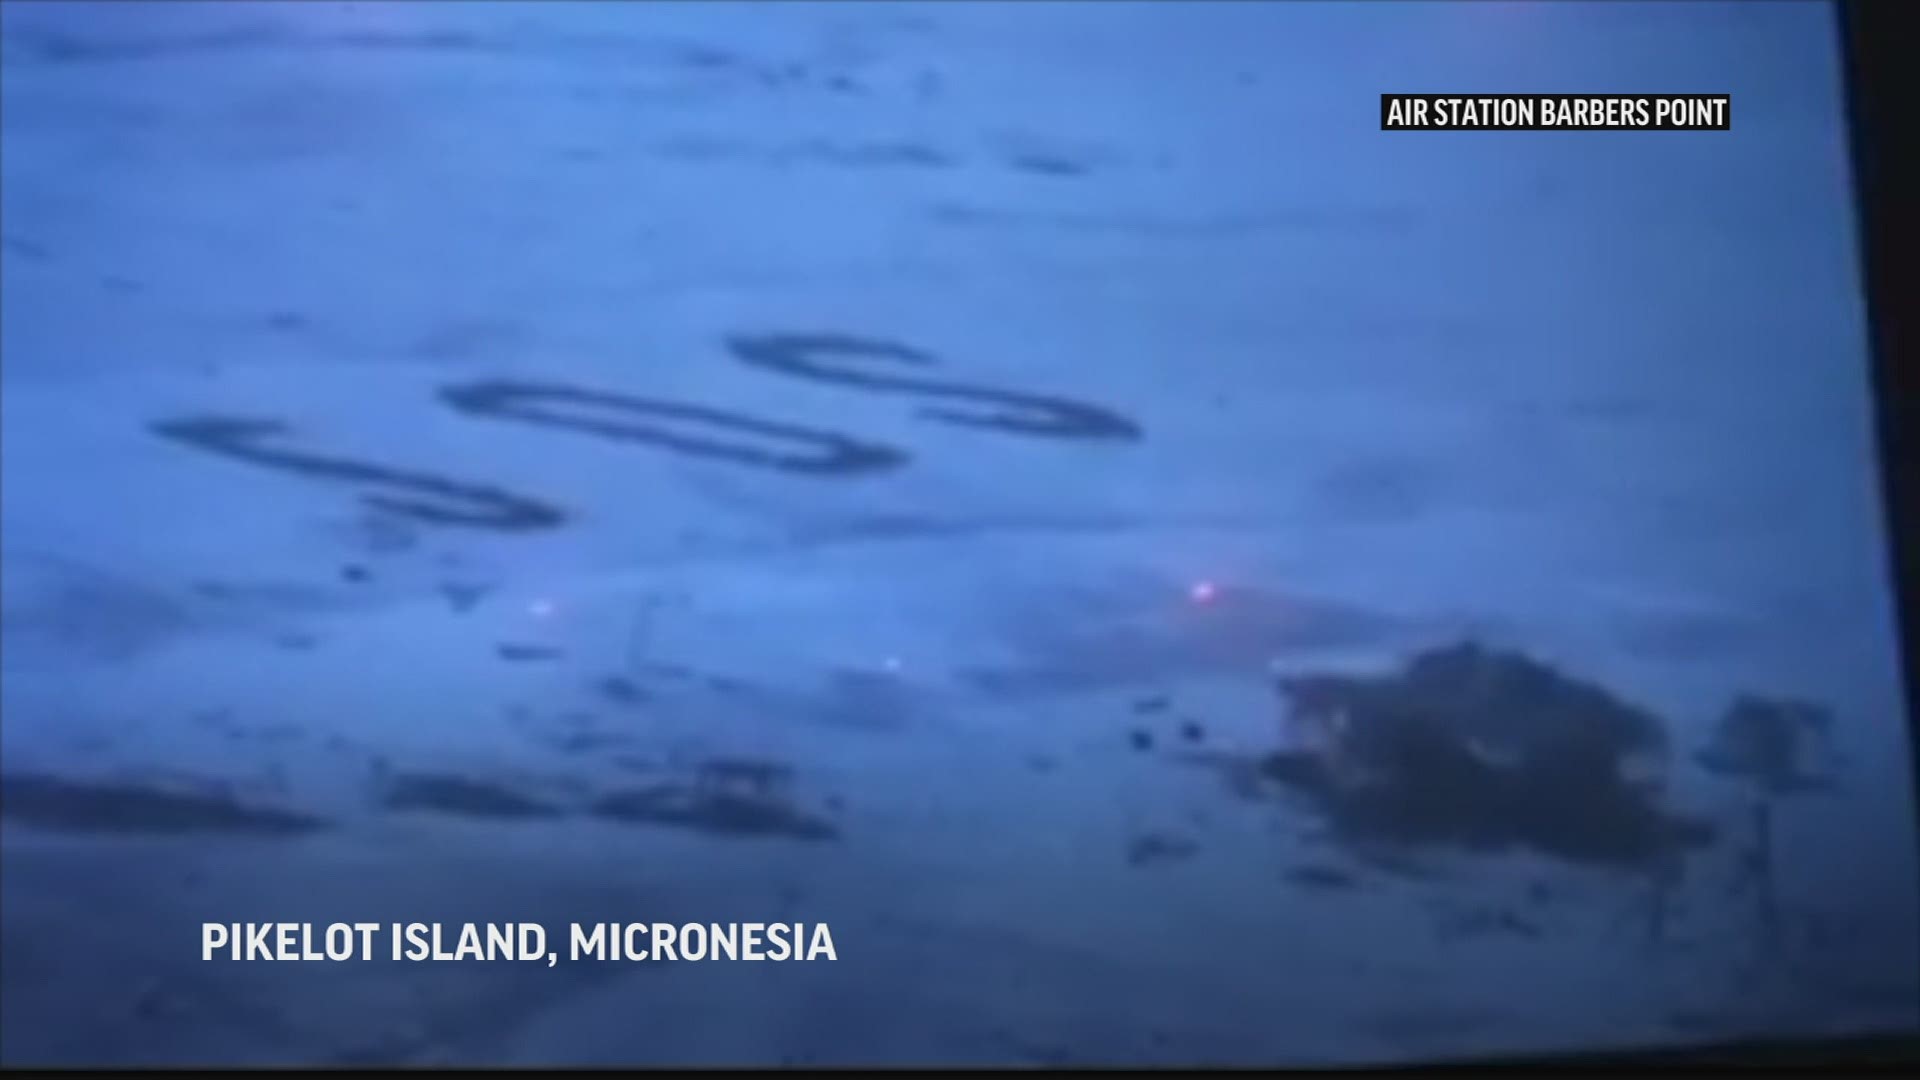 Three men have been rescued from a tiny Pacific island after writing a giant SOS sign in the sand that was spotted from above, authorities say.